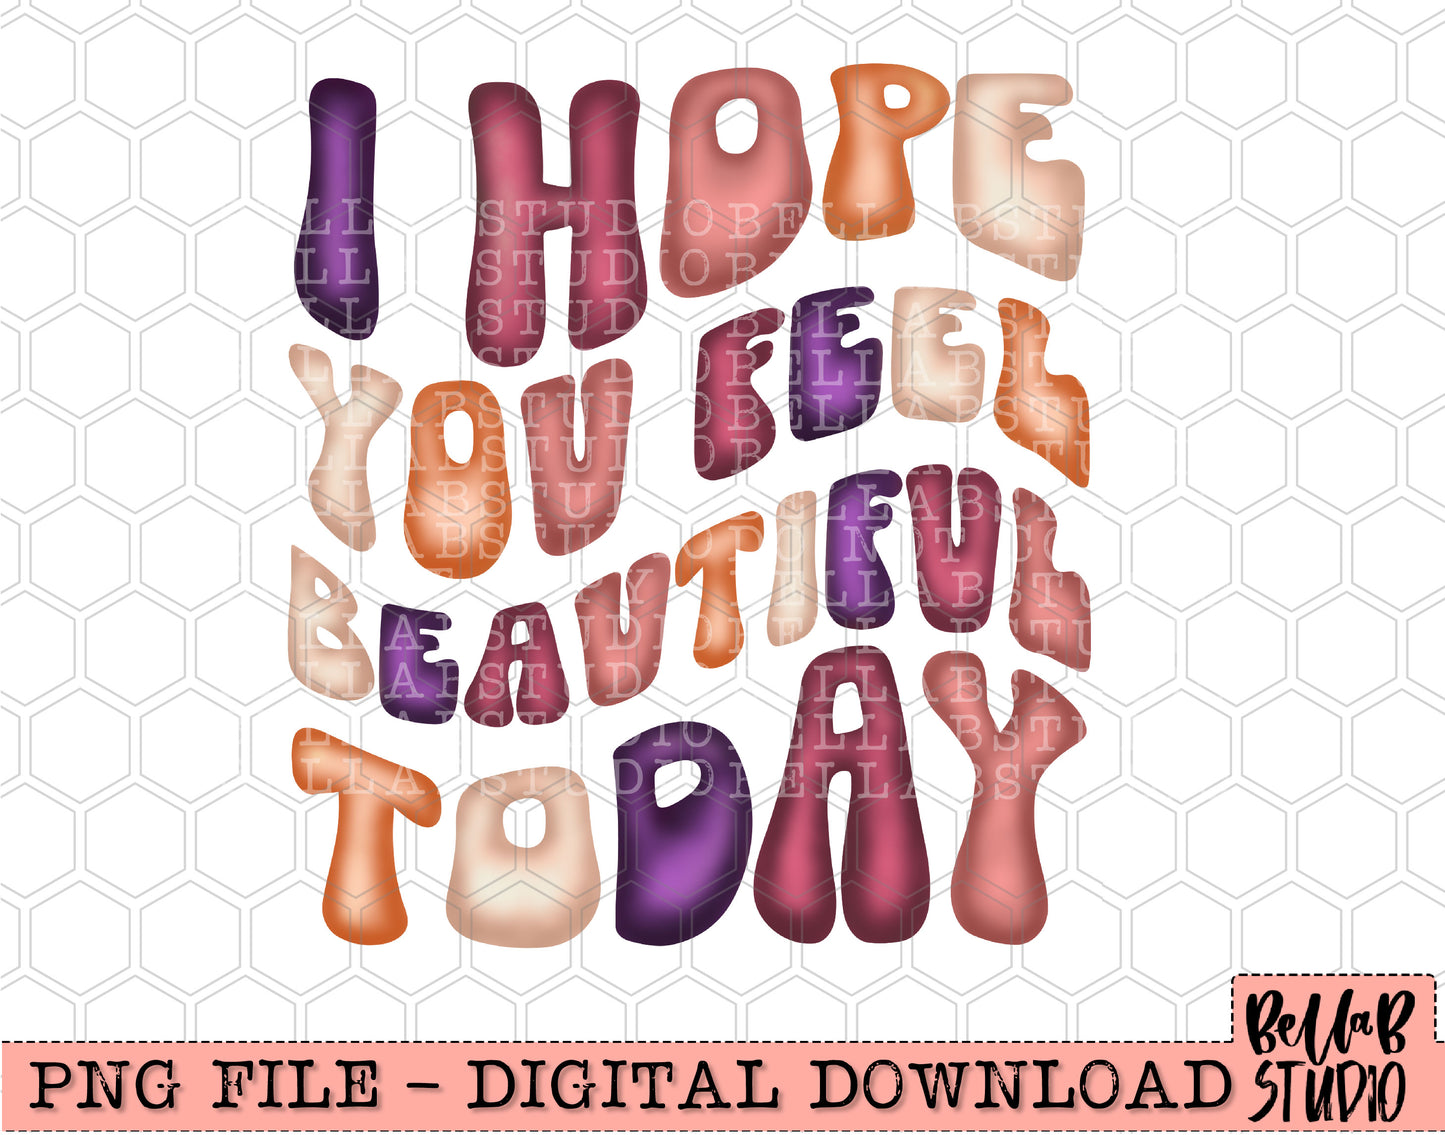 I Hope You Feel Beautiful Today PNG Design